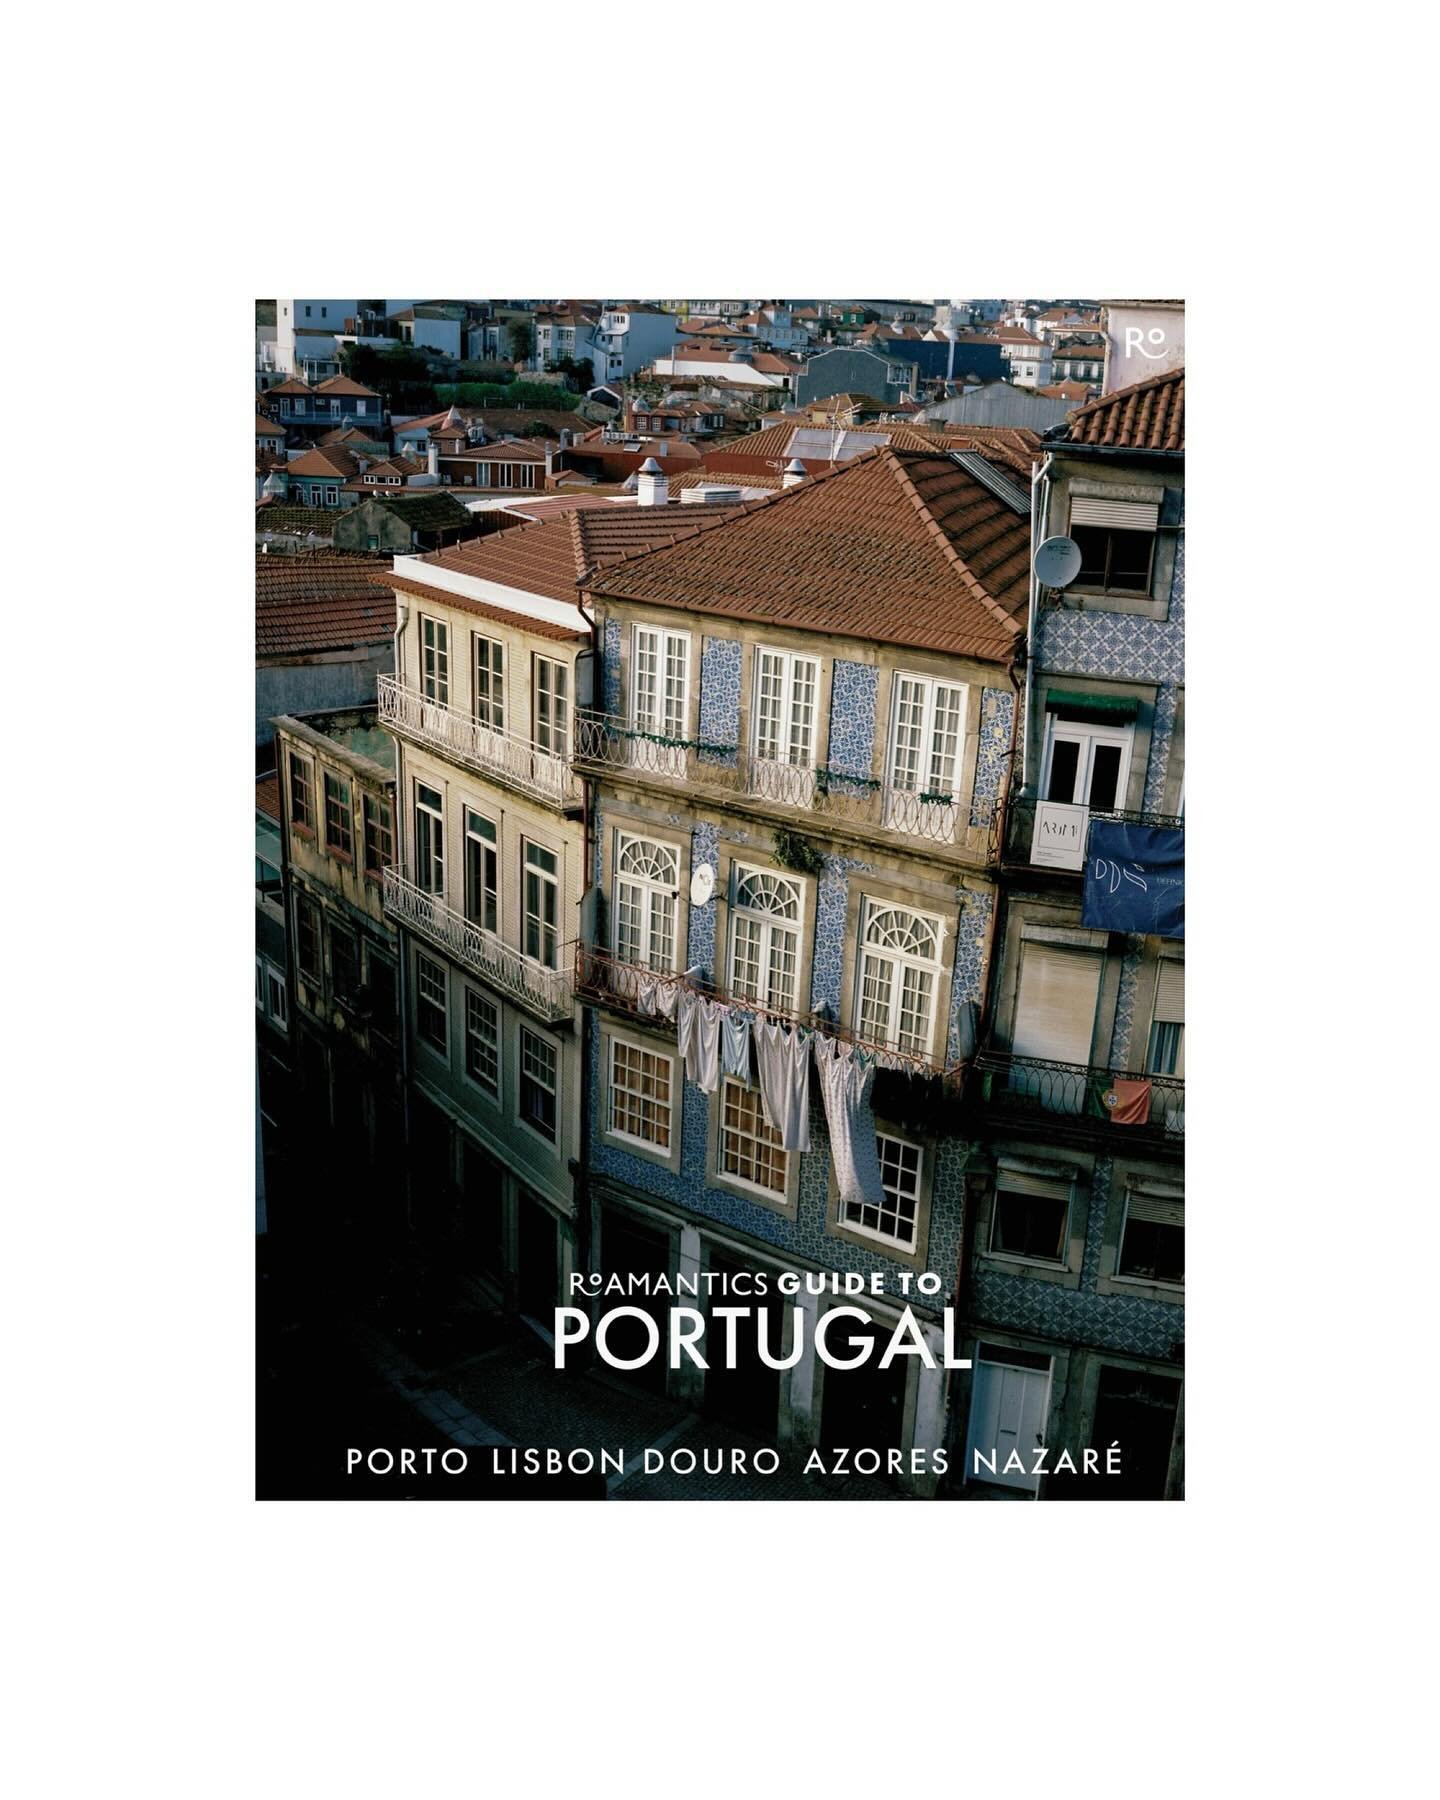 Our #Portugal guide is LIVE! We are so excited to share it with you 🎉 

What you&rsquo;ll find inside: 

&bull; Hotel and stay recommendations in Lisbon, Porto, The Azores, Nazar&eacute;, Sintra and the Douro Valley
&bull; The best places to dine fo